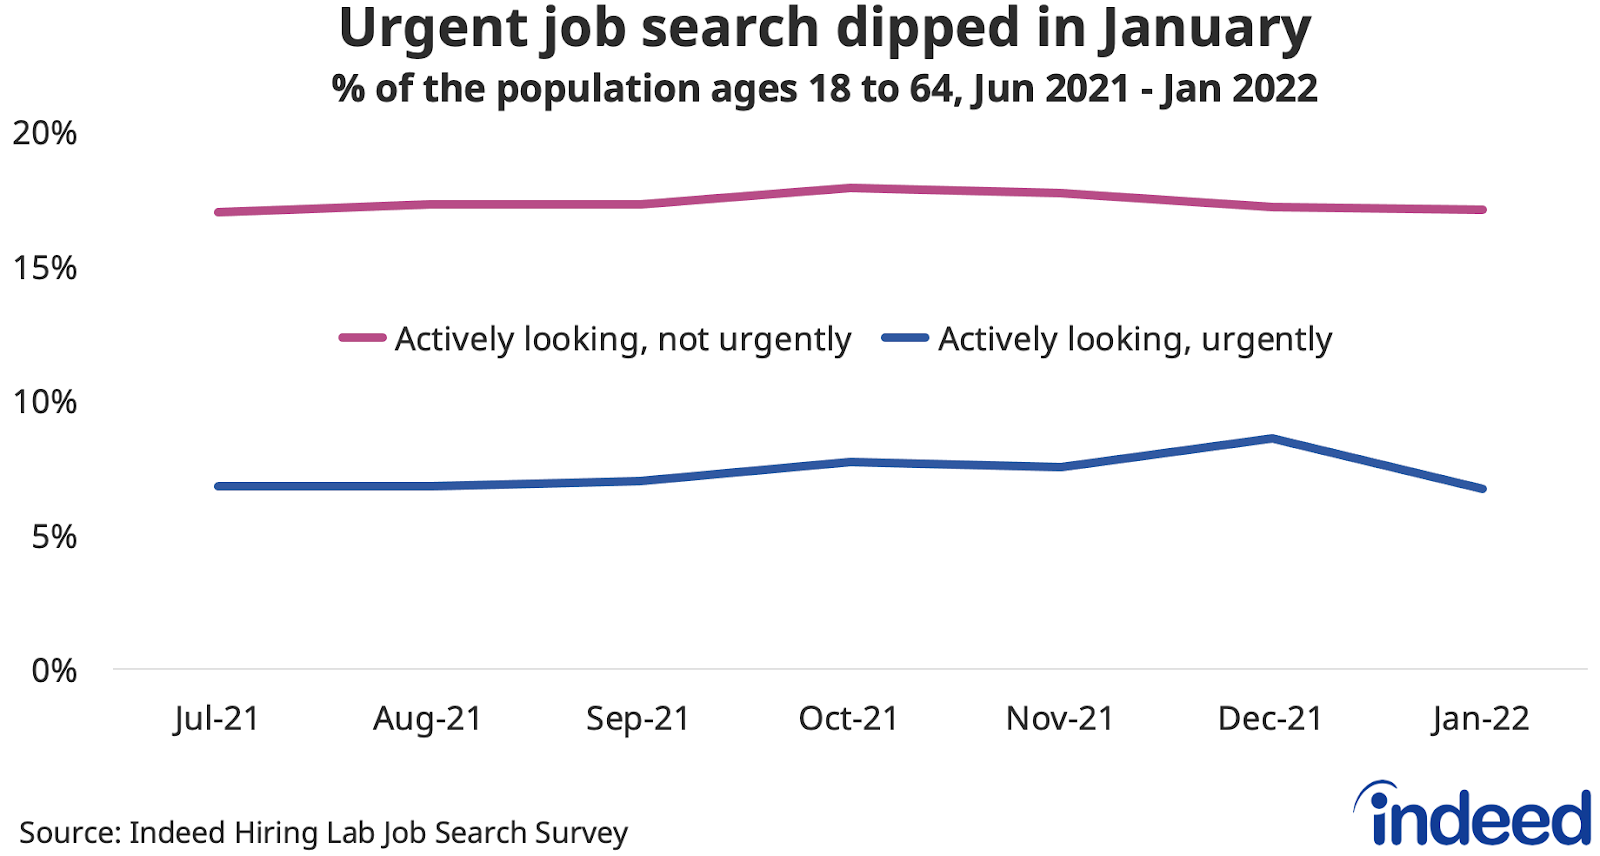 Line chart titled “Urgent job search dipped in January.”